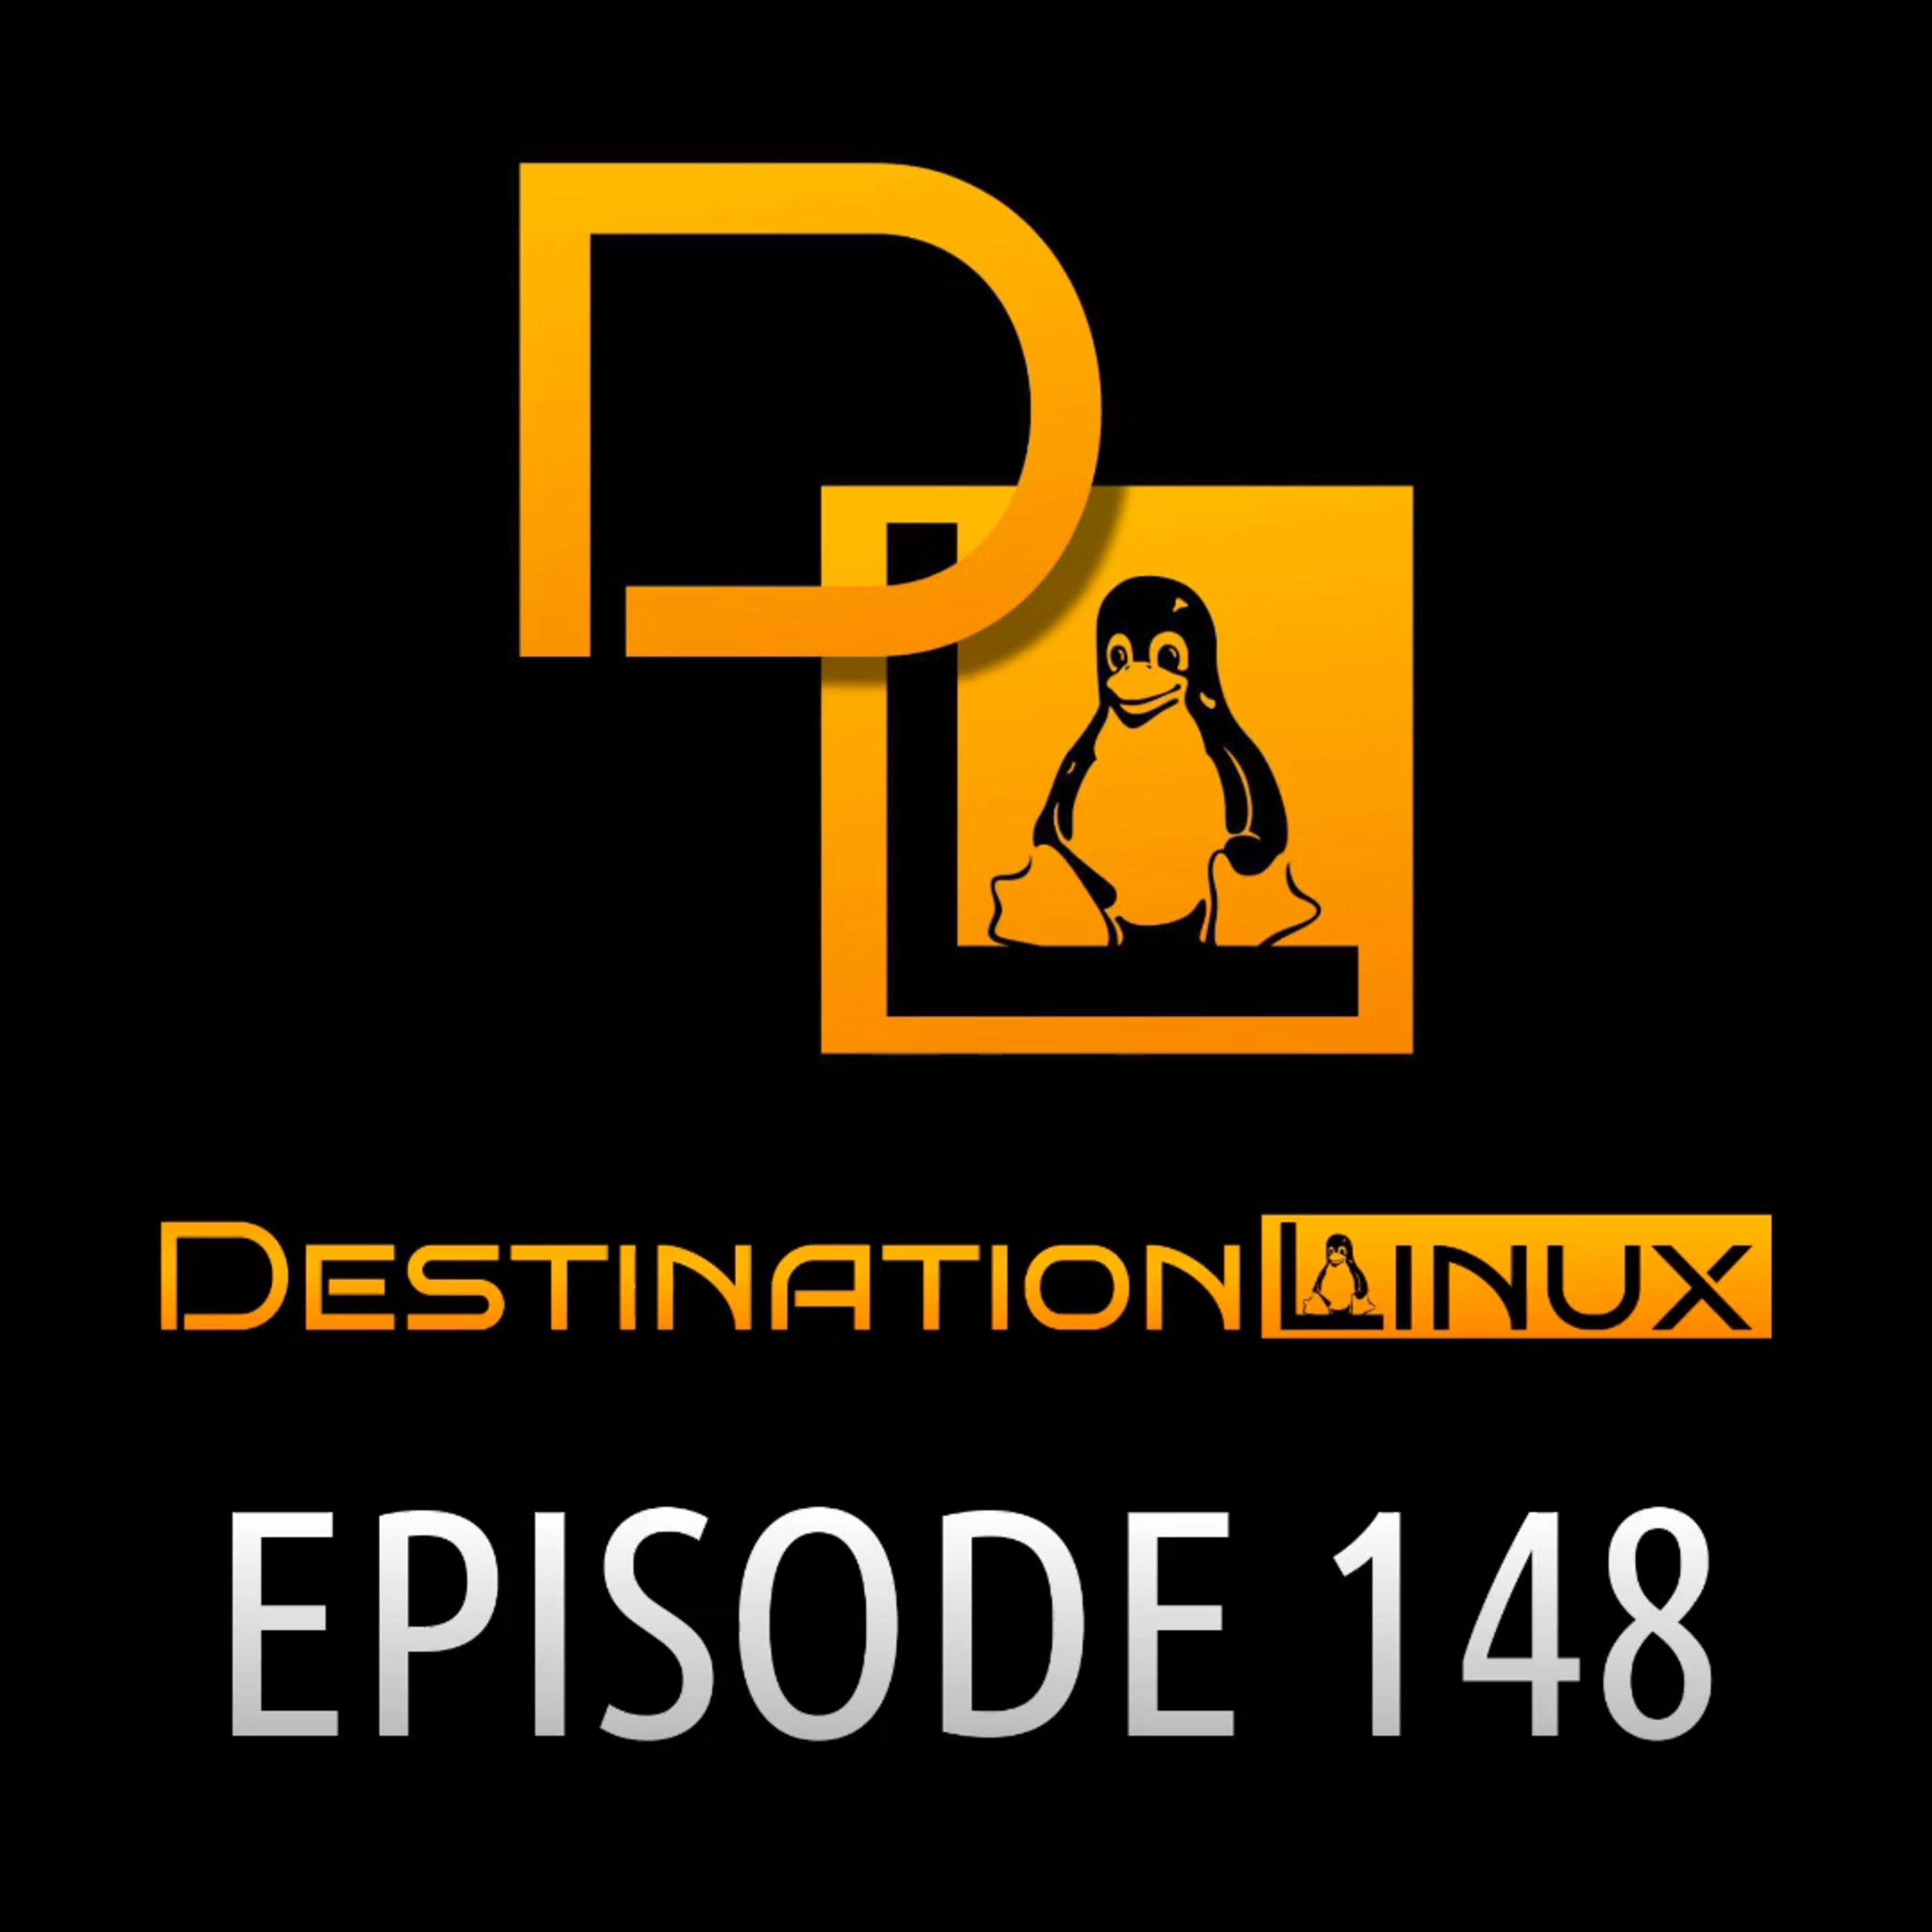 Episode 148: Is Linux Slower?, Google Tracking Your Health Records, Bytecode Alliance | Destination Linux 148